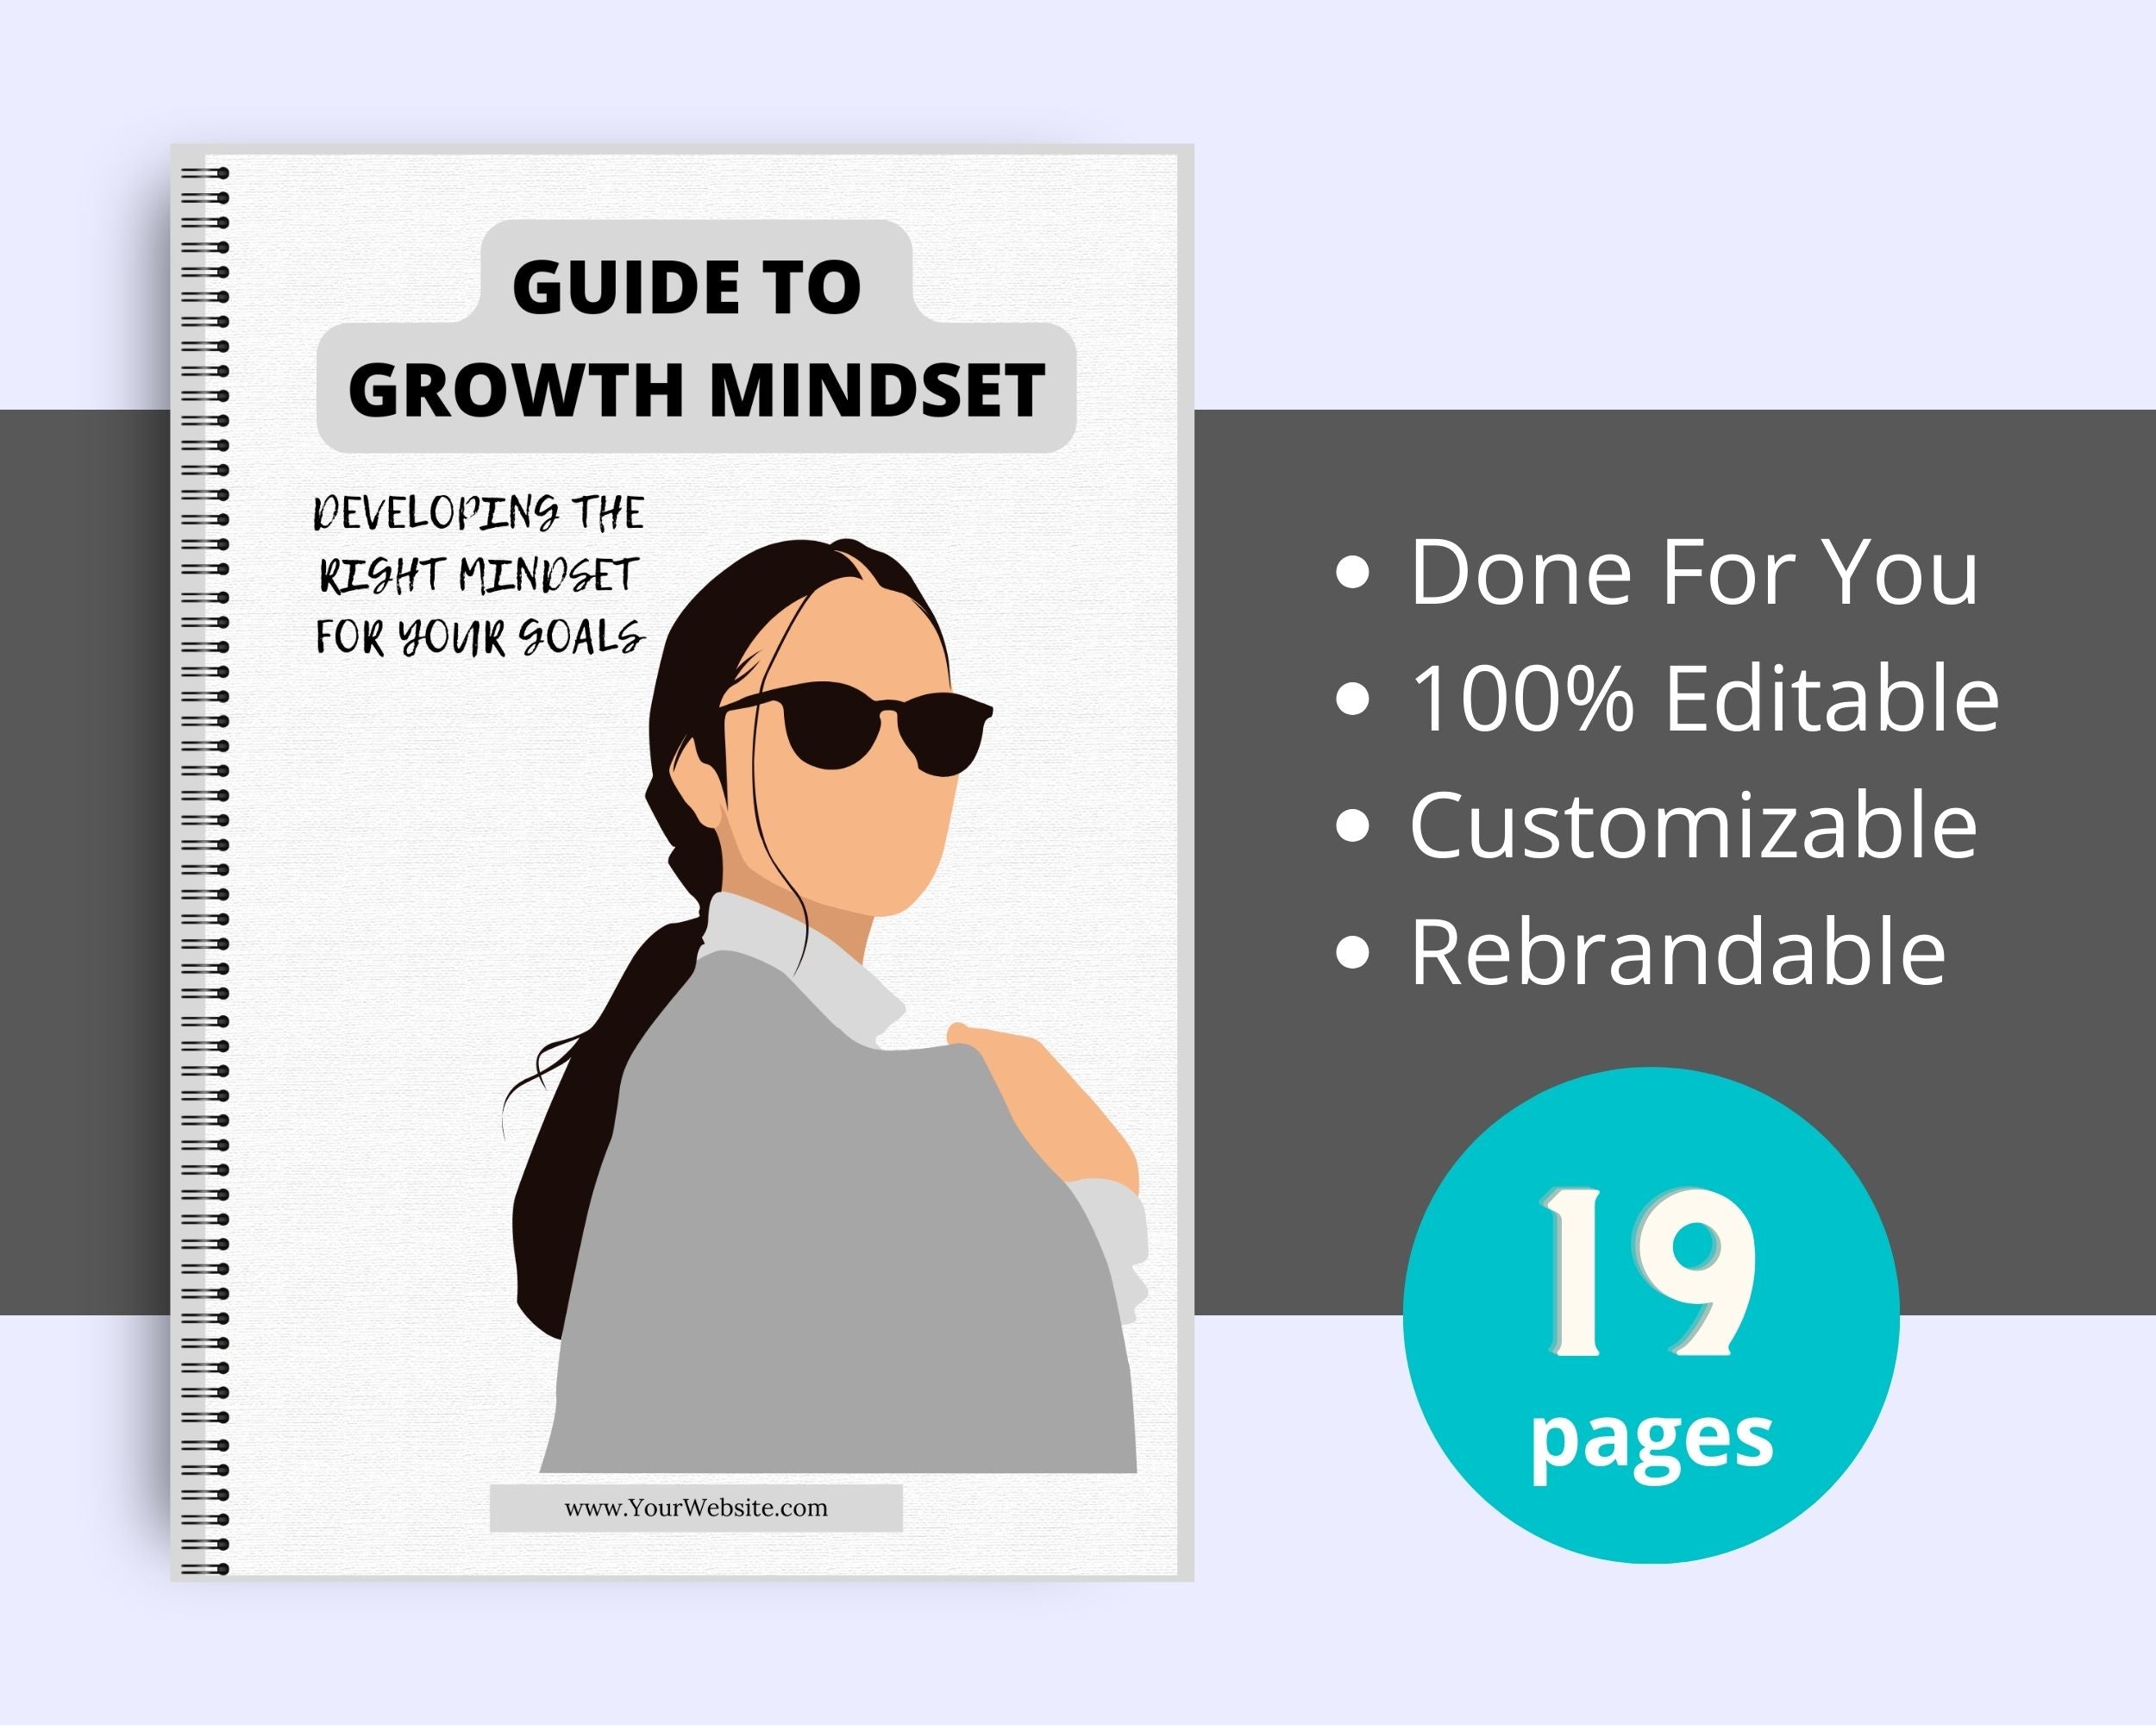 Editable Guide to Growth Mindset Ebook | Done-for-You Ebook in Canva | Rebrandable and Resizable Canva Template